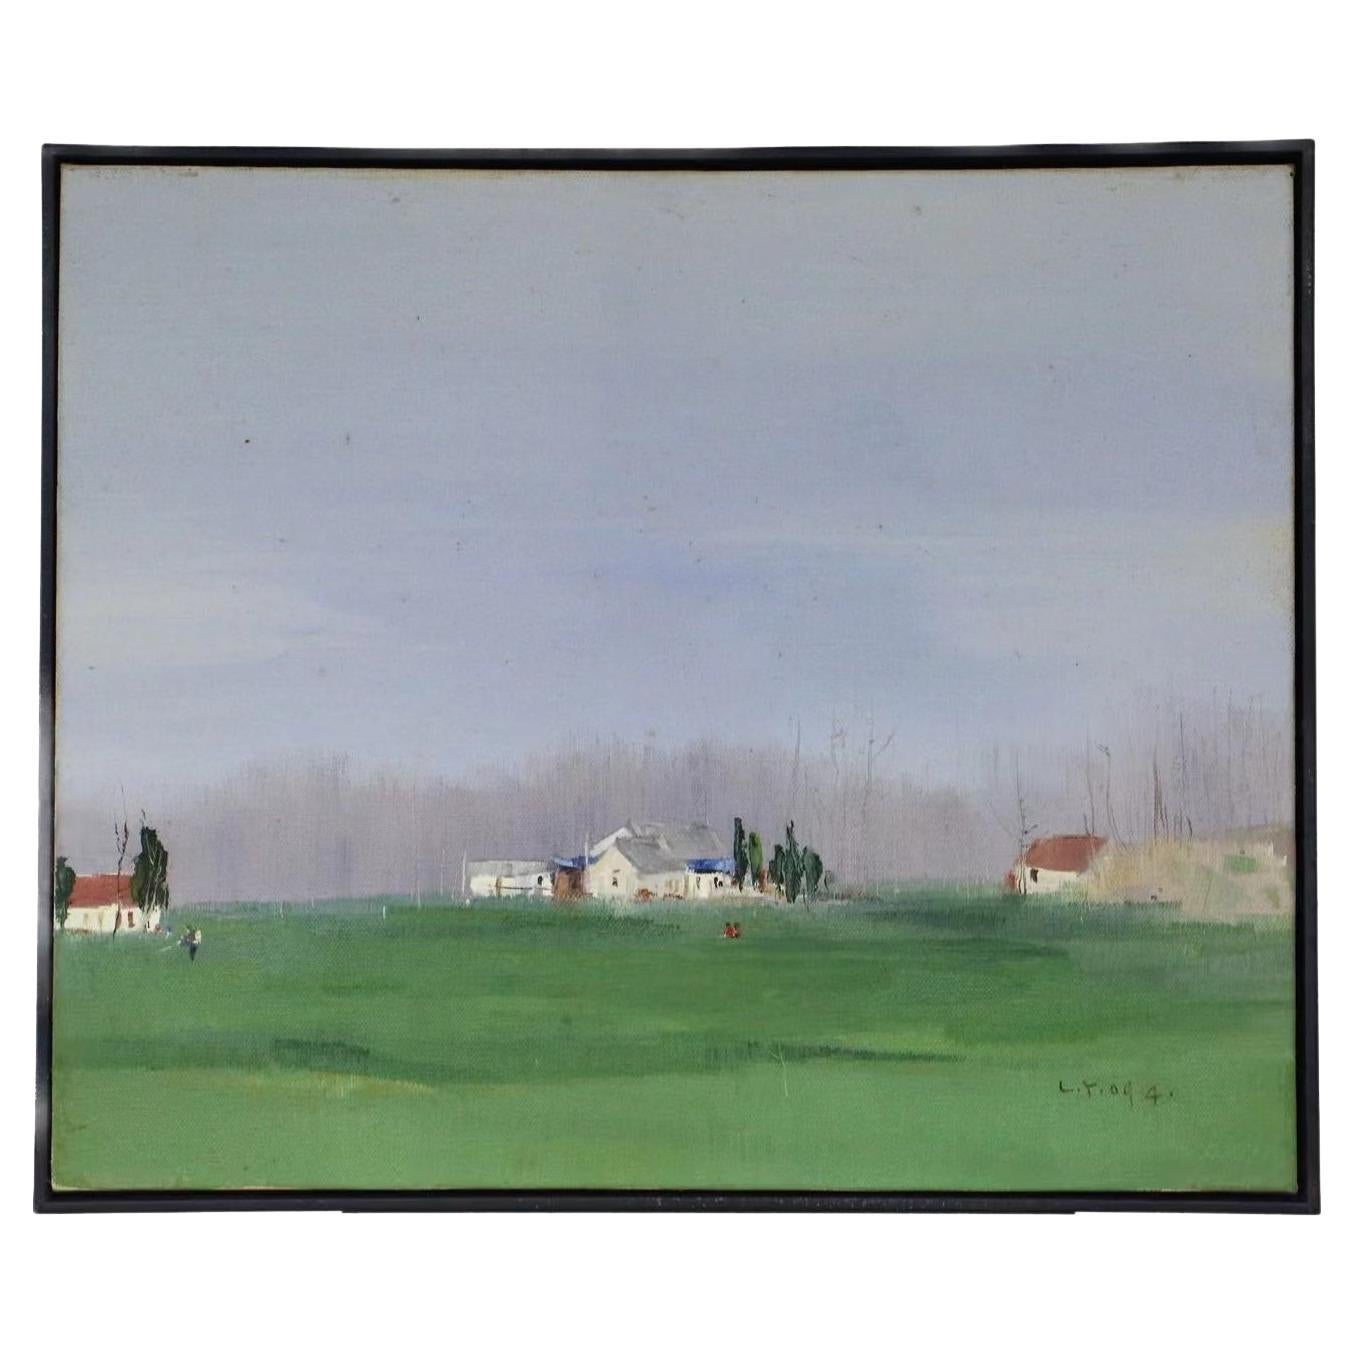 "Lost in Countryside” Series with Black Metallic Frame